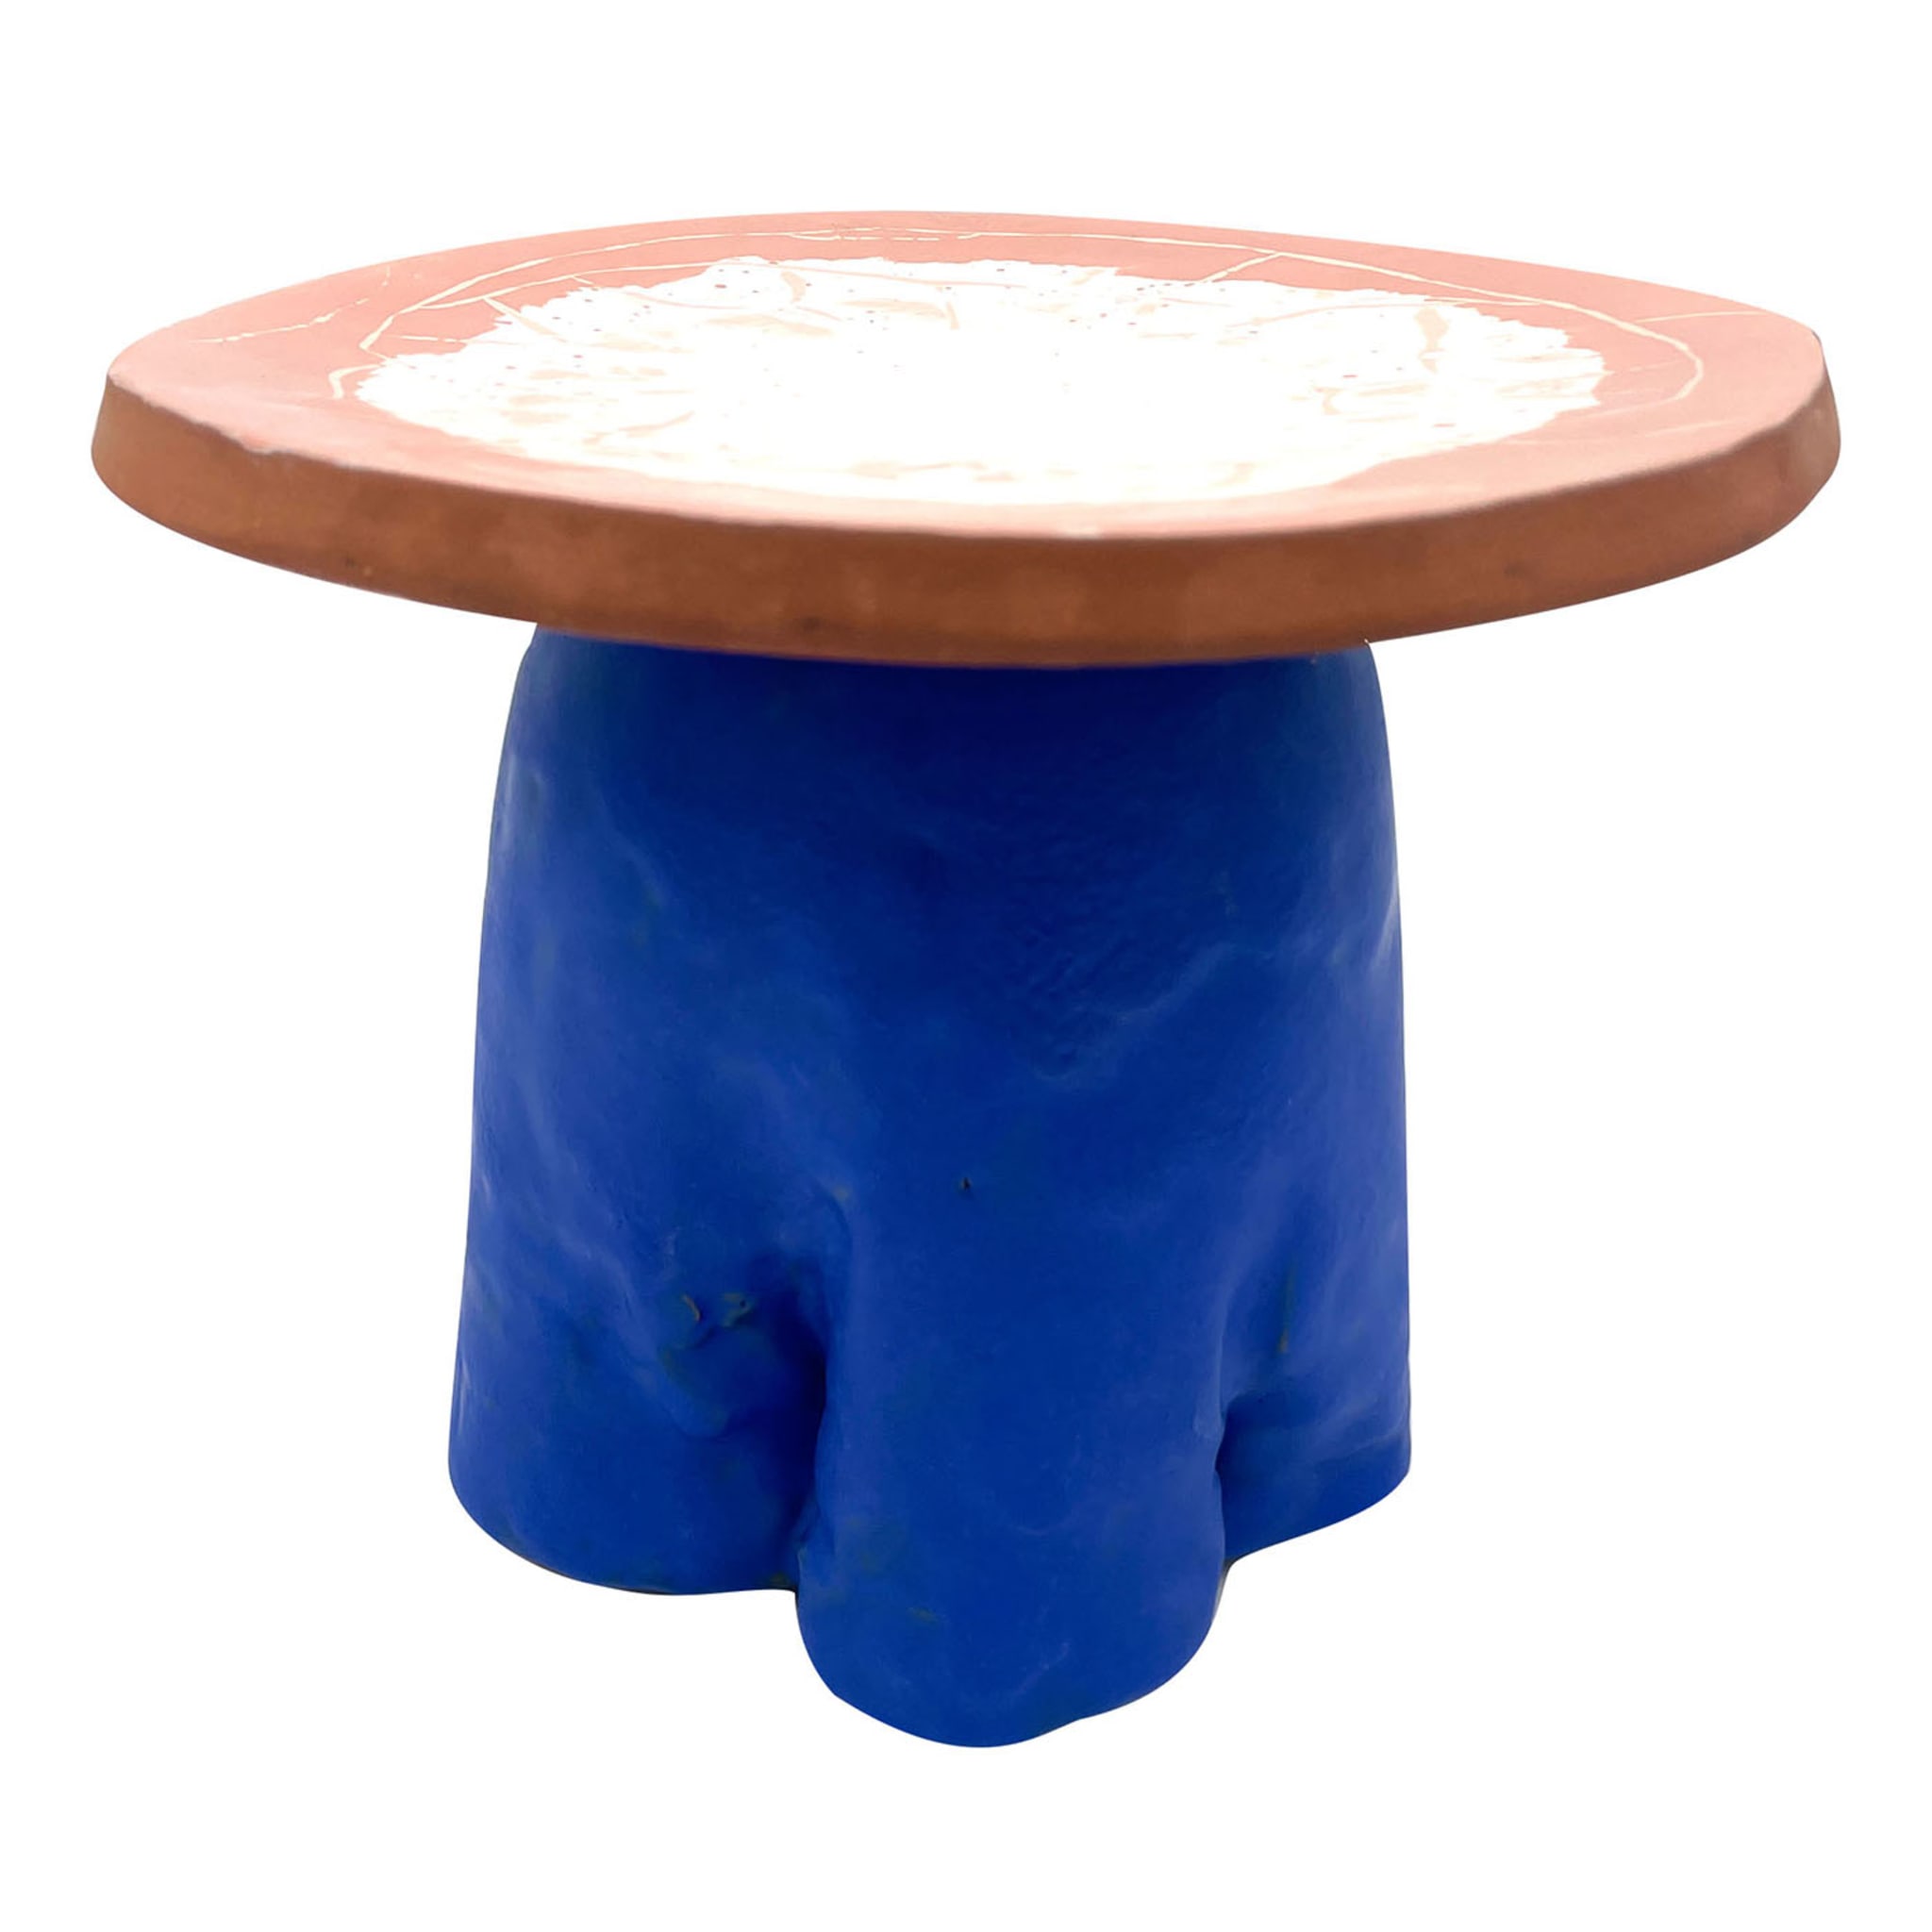 Fungo Rock Egyptian Blue and Powder Pink Cake Stand - Main view